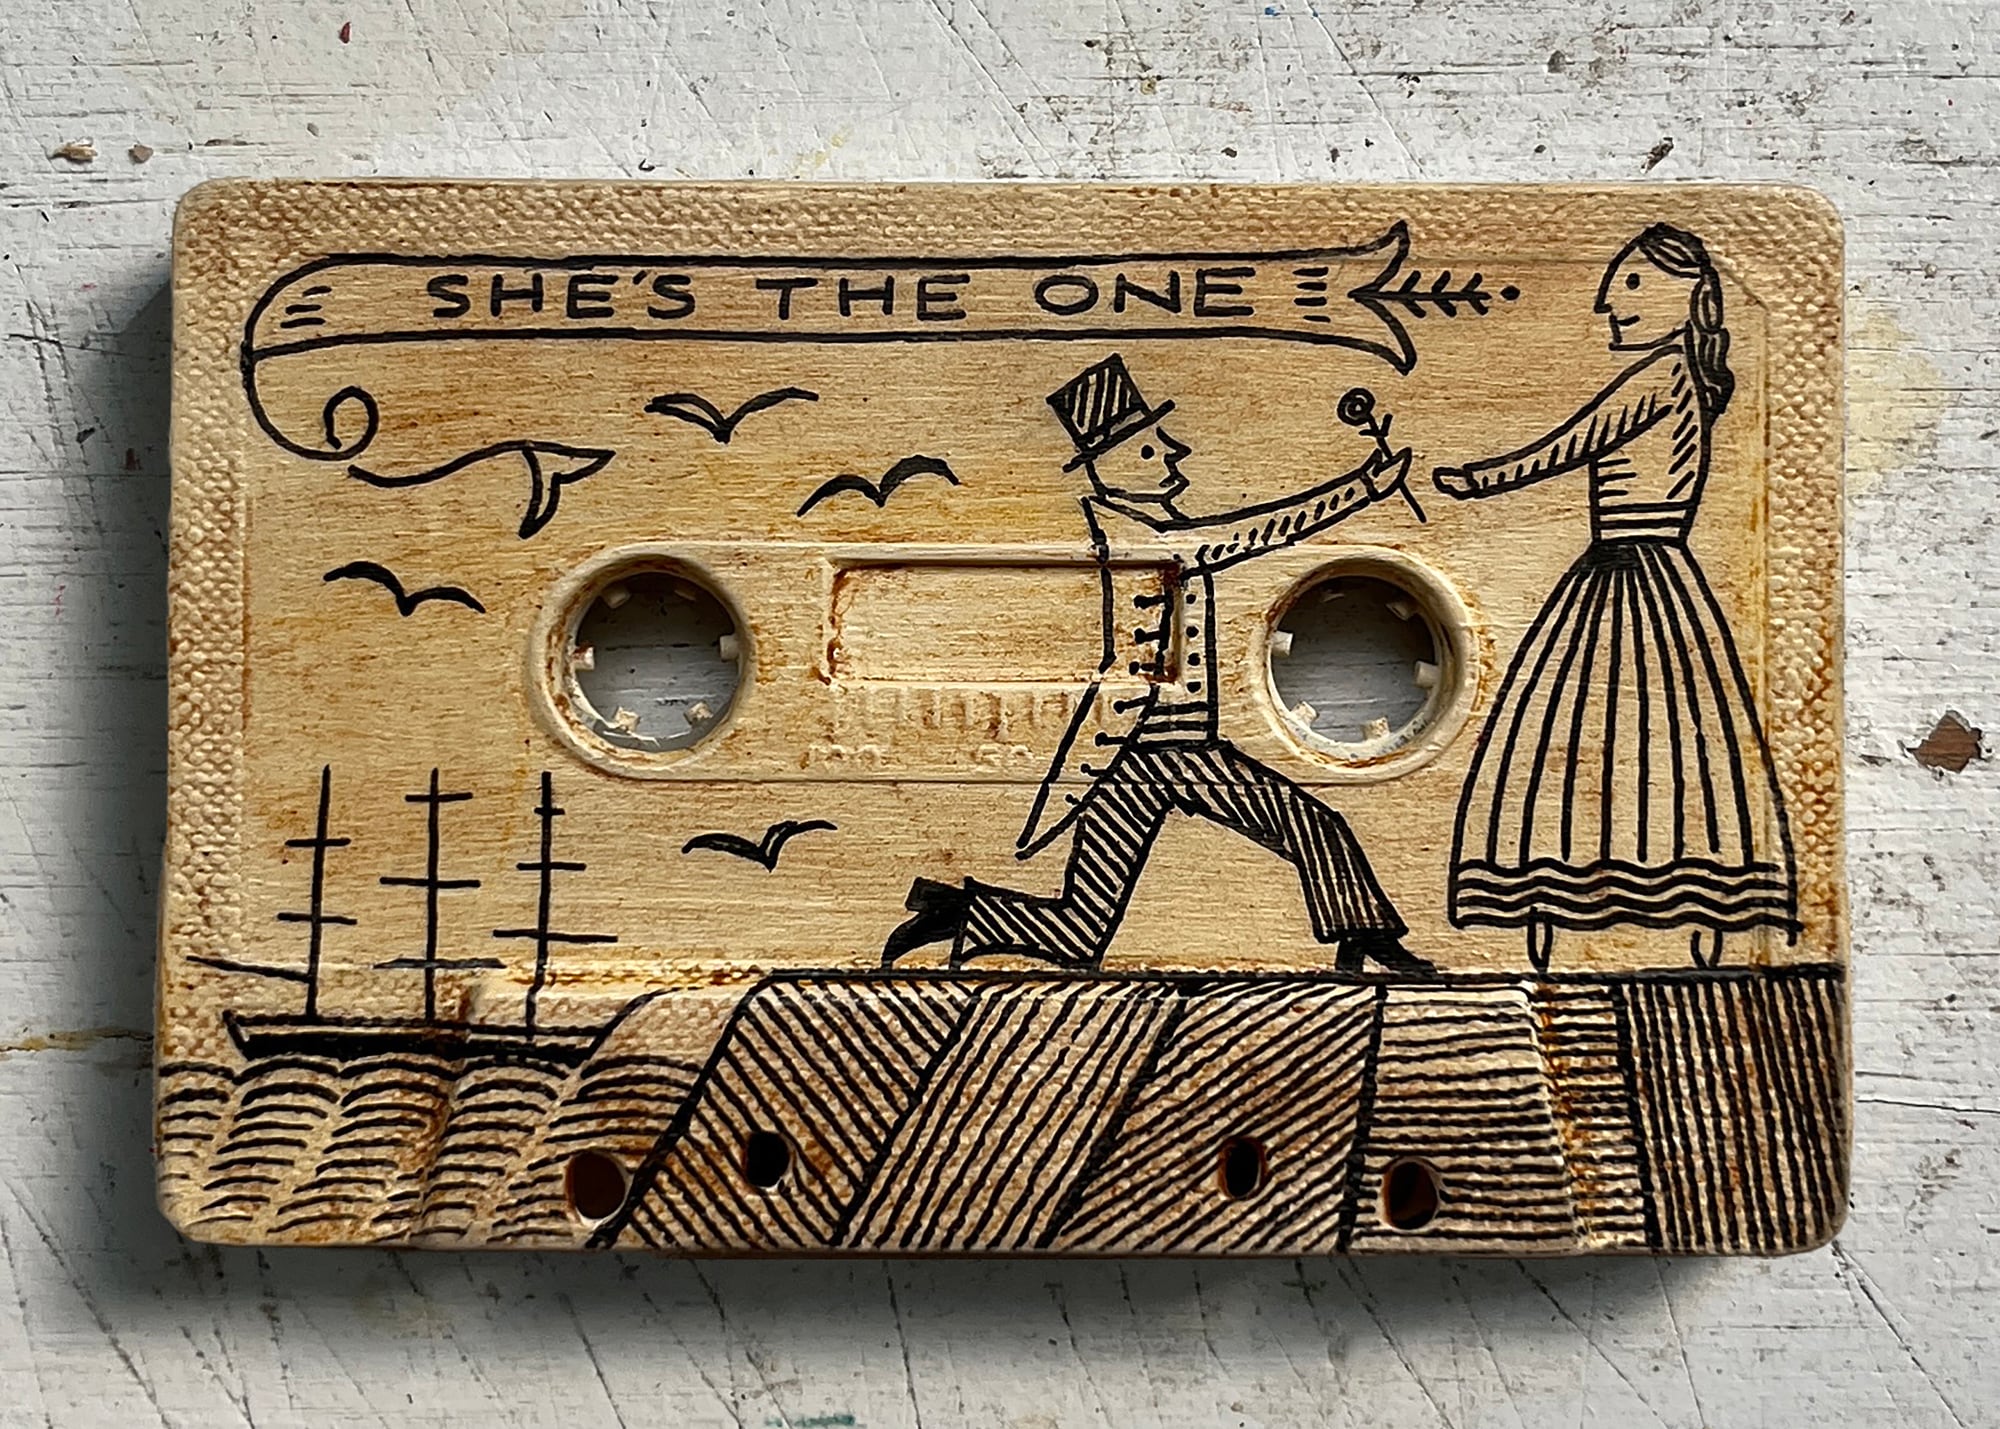 A box painted beige engraved with a man proposing to a woman with words "she is that" until